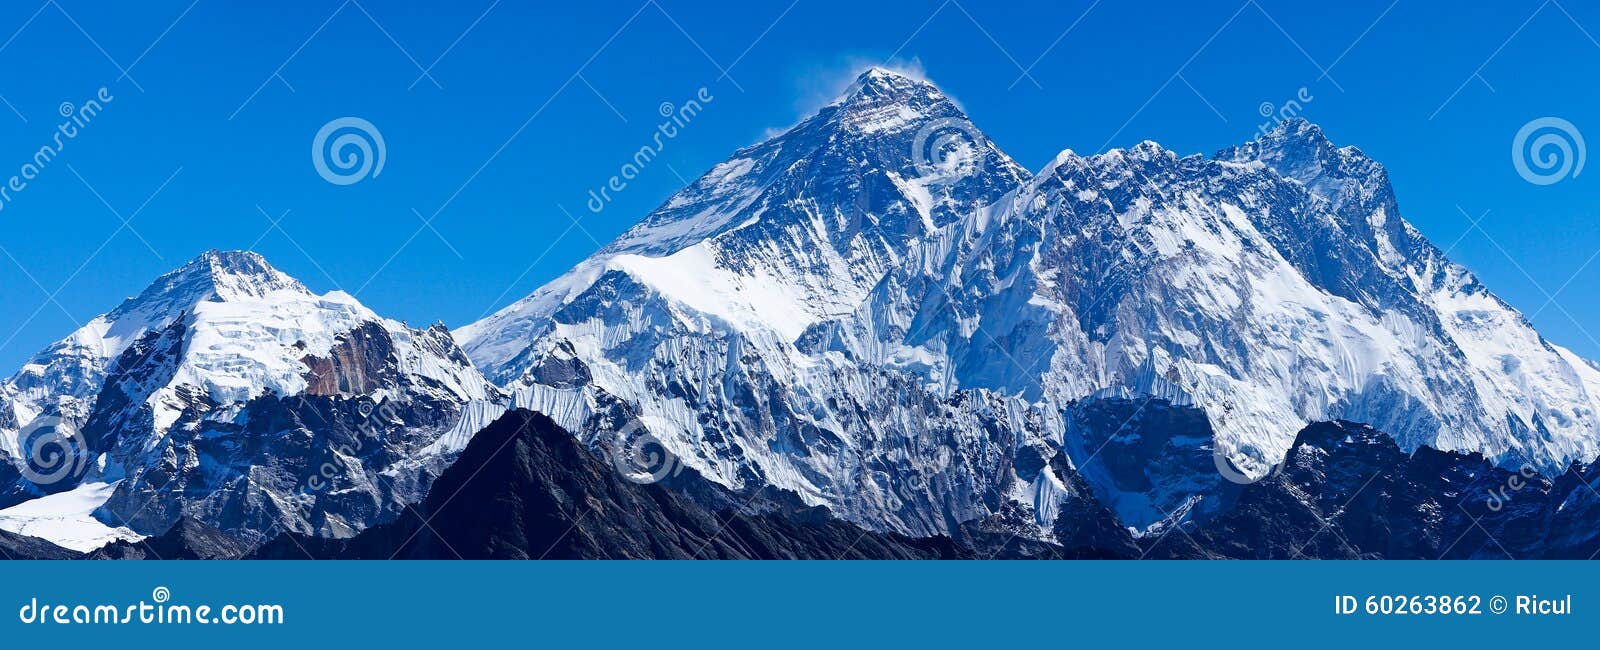 mount everest with lhotse and pumori